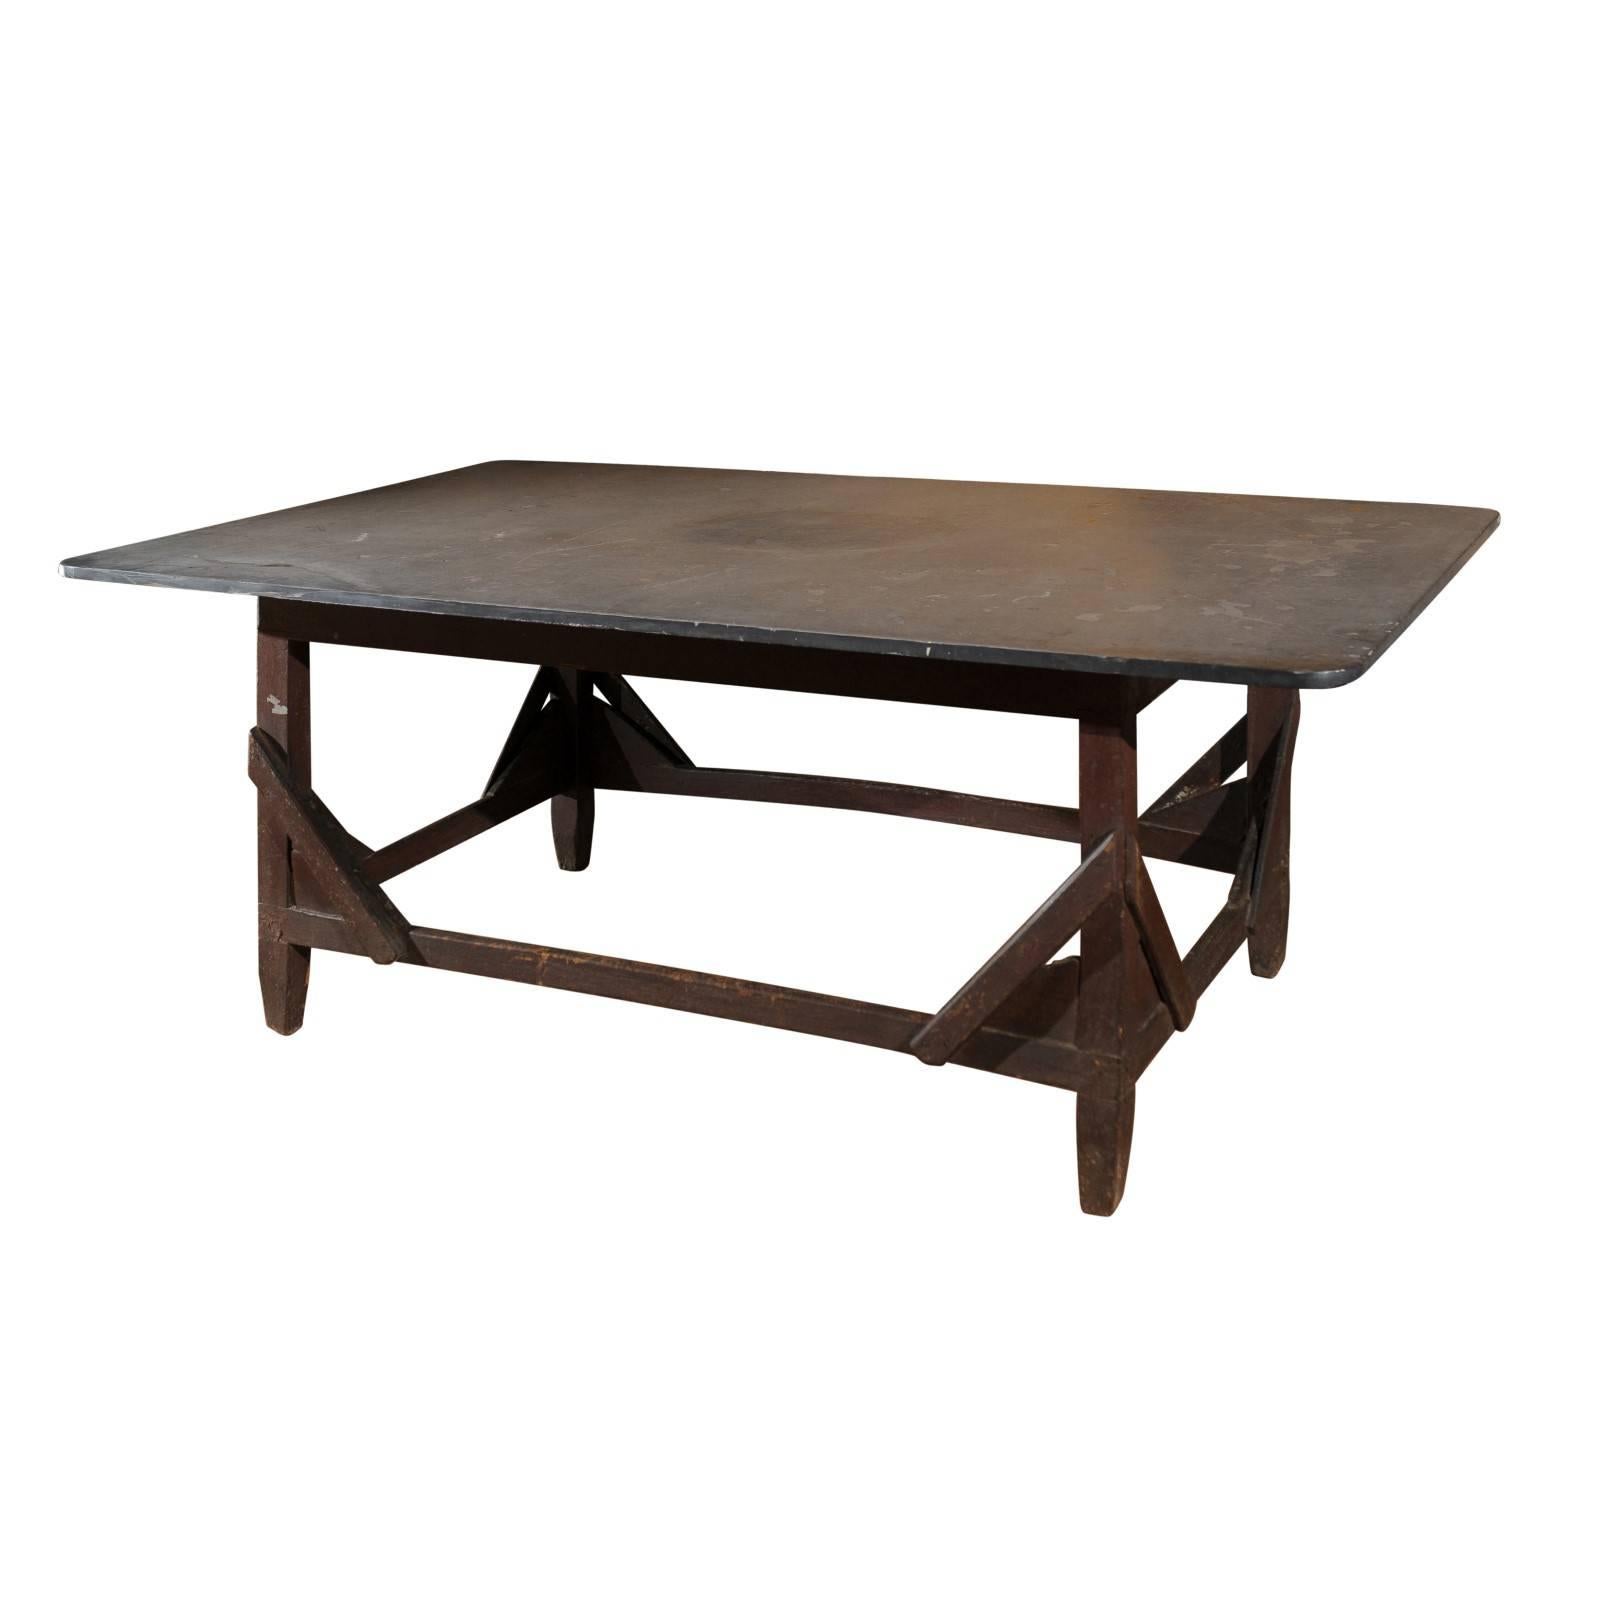 Italian Rustic Work Table with Bluestone Top and Stretchered Wooden Base